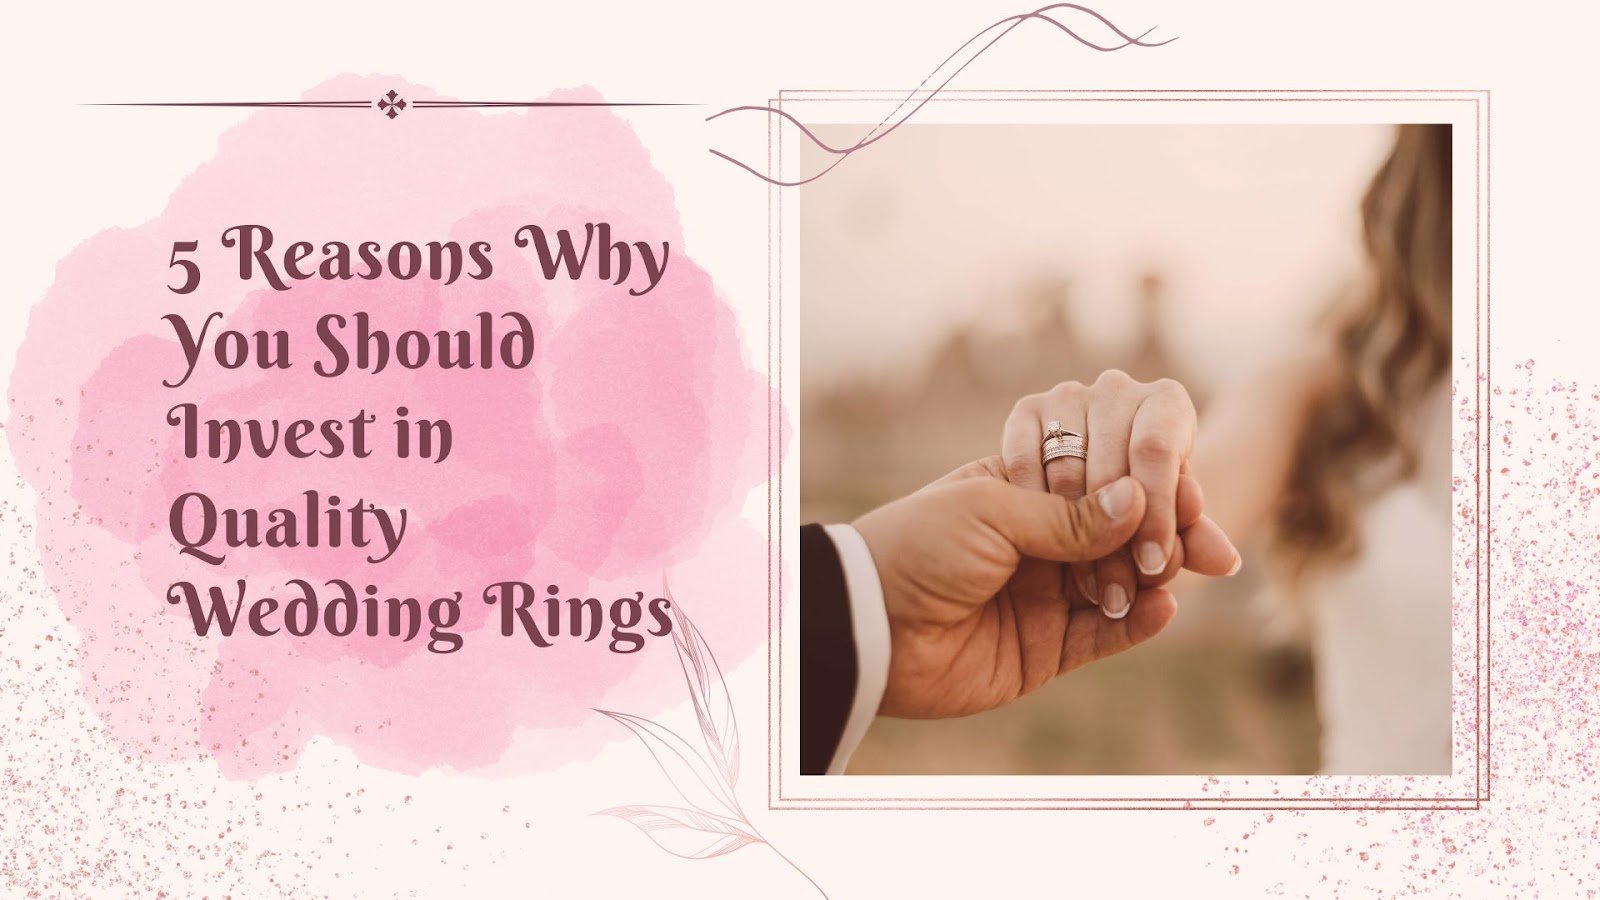 5 Reasons Why You Should Invest in Quality Wedding Rings